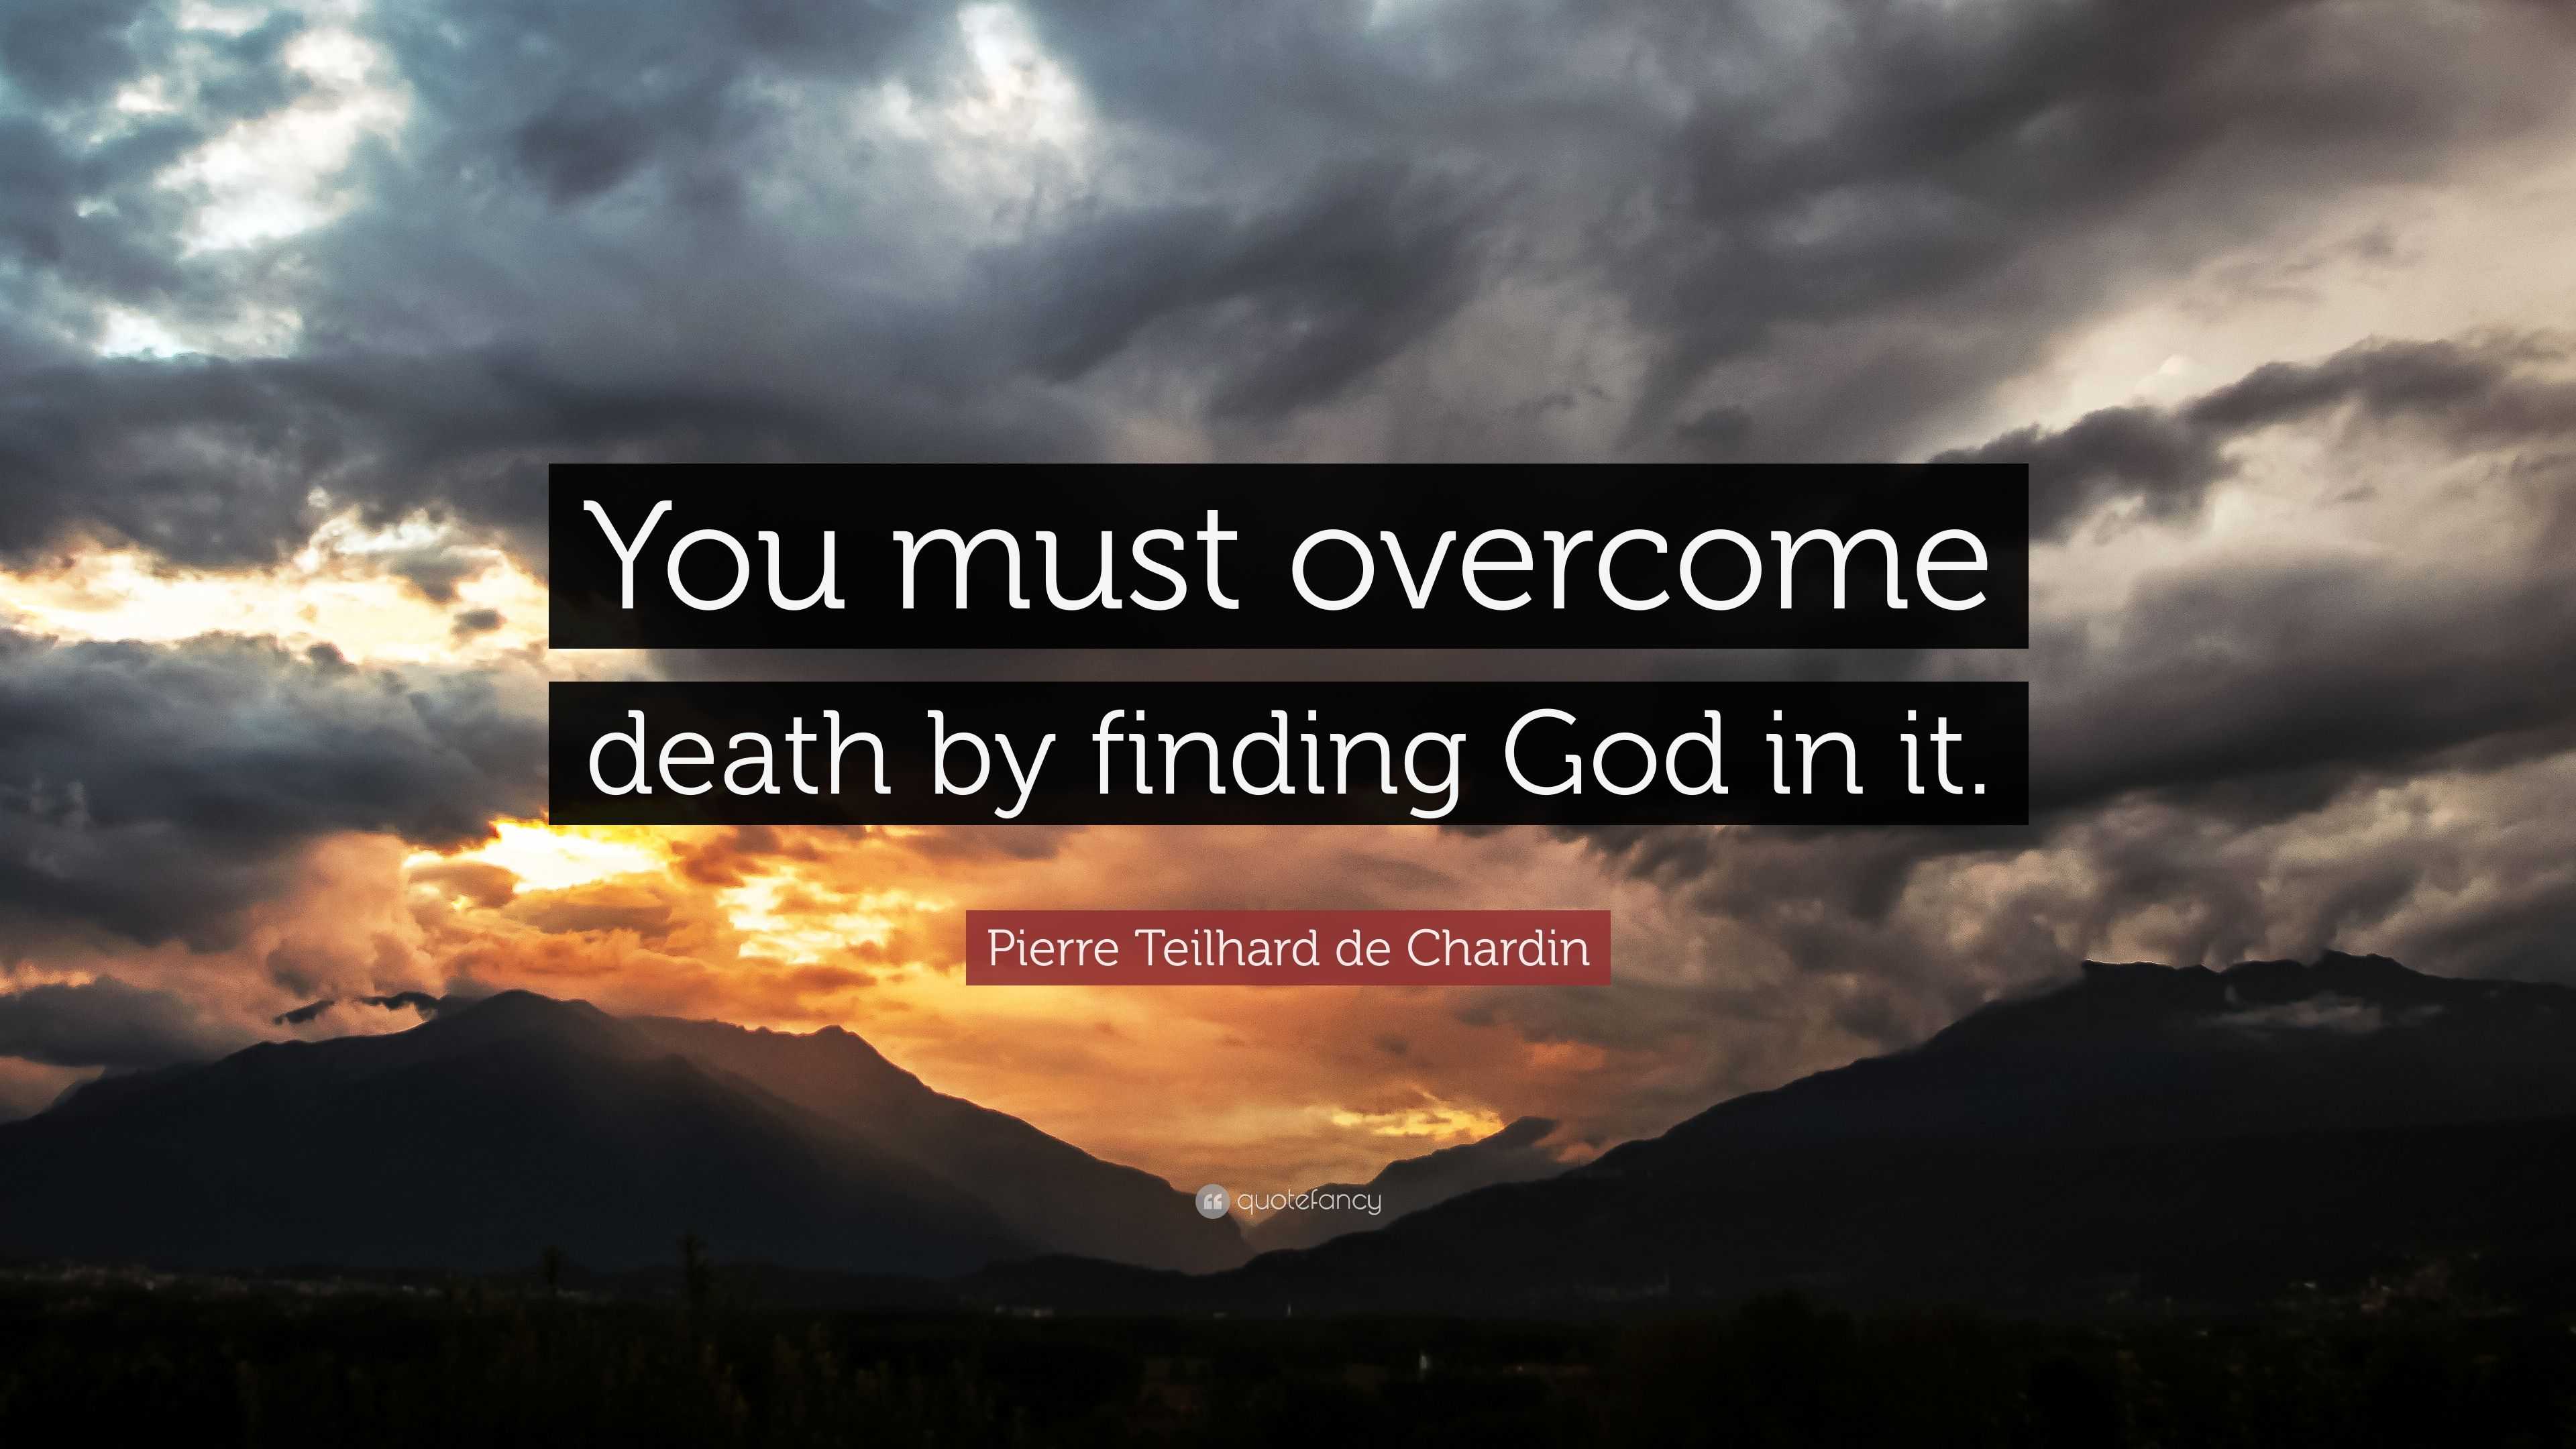 Pierre Teilhard de Chardin Quote: “You must overcome death by finding ...